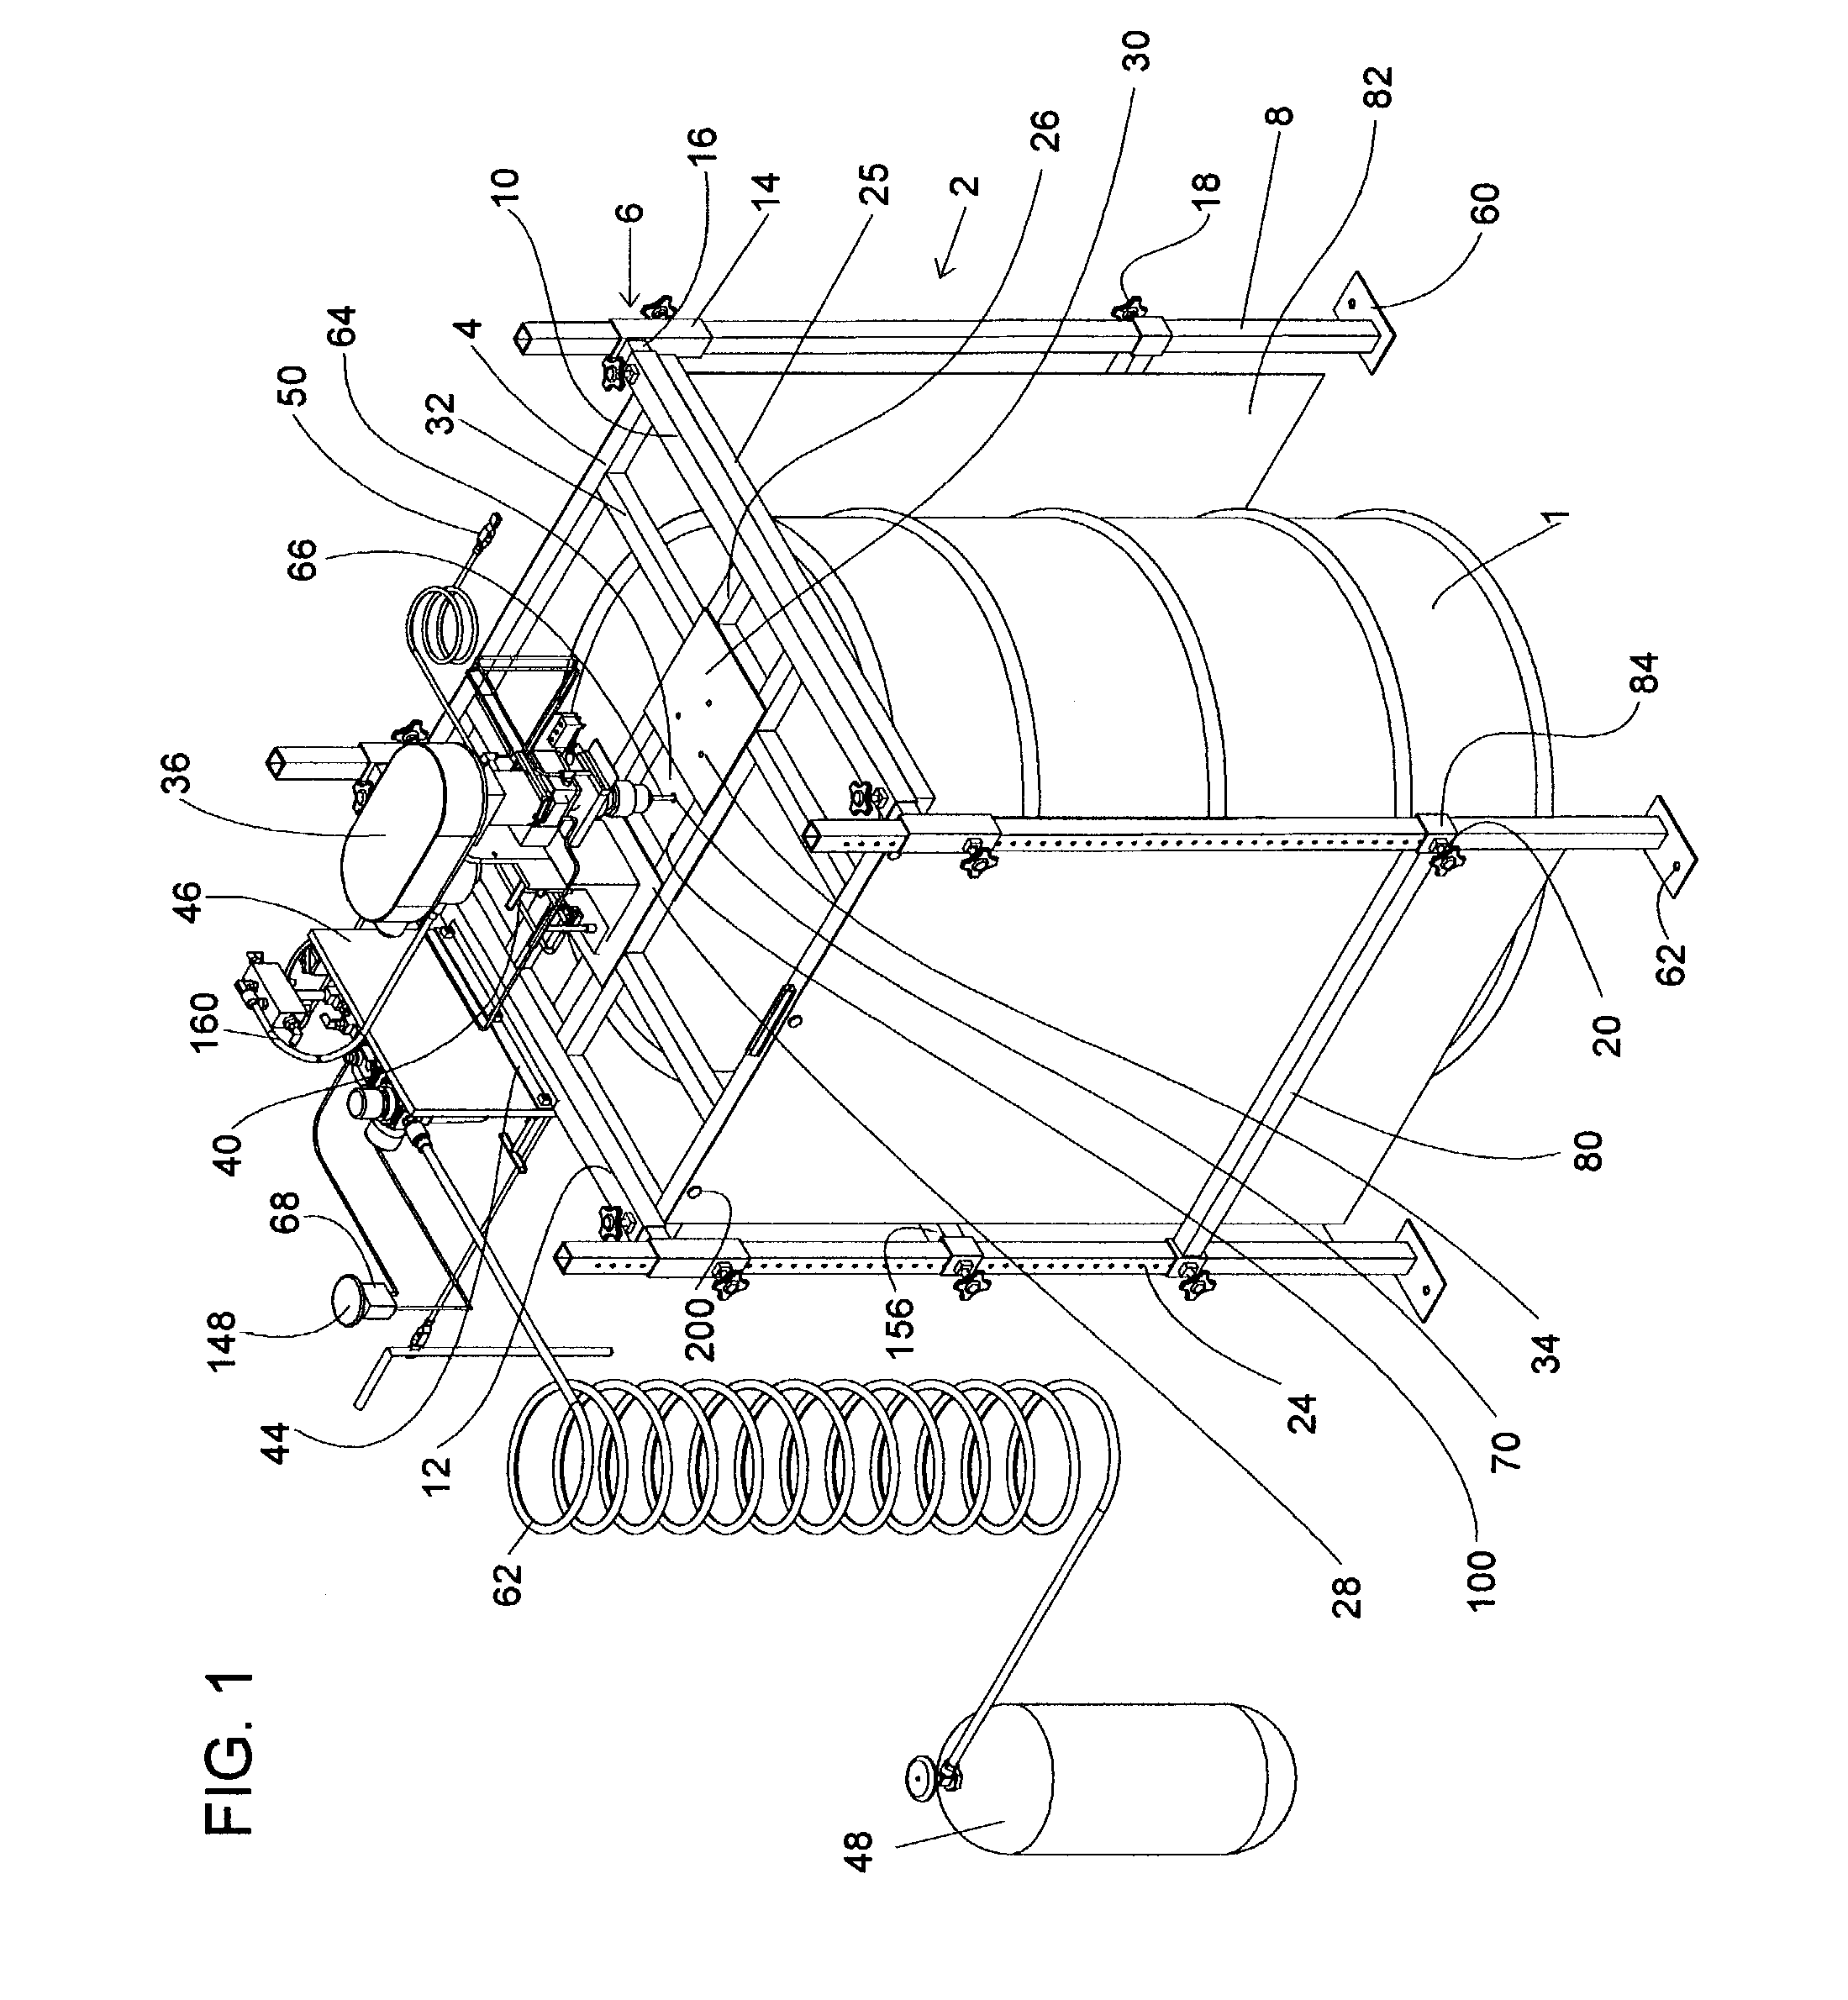 Container drilling apparatus for non-intrusive perforation of pressurized containers